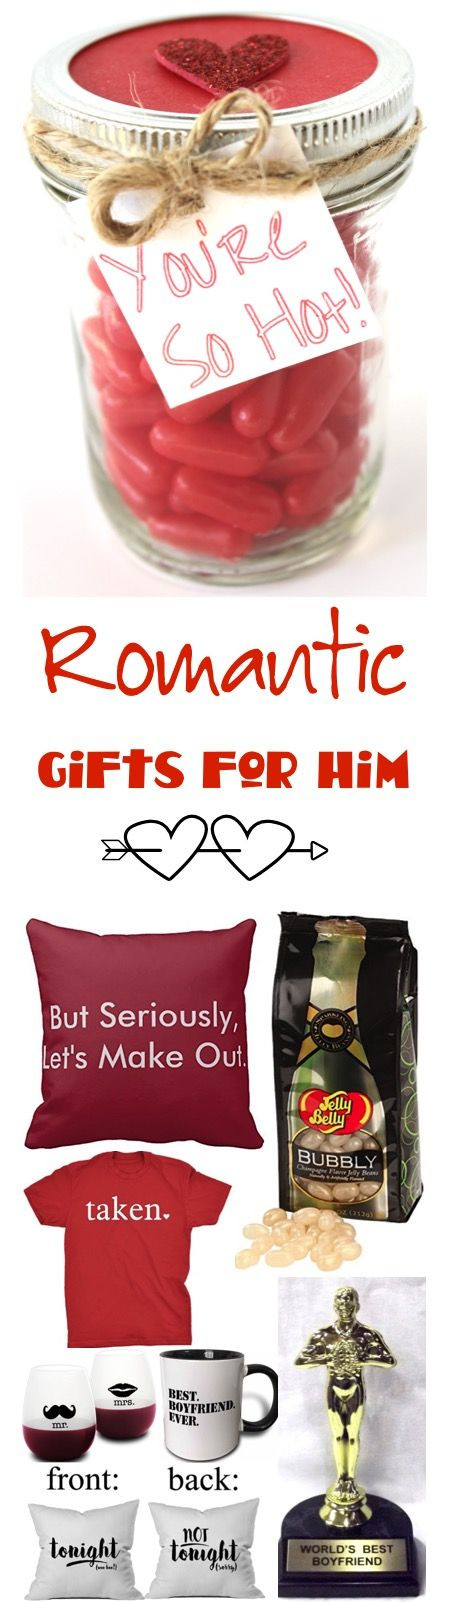 Romantic Gift Ideas Boyfriends
 44 Romantic Gifts for Him So many fun silly and